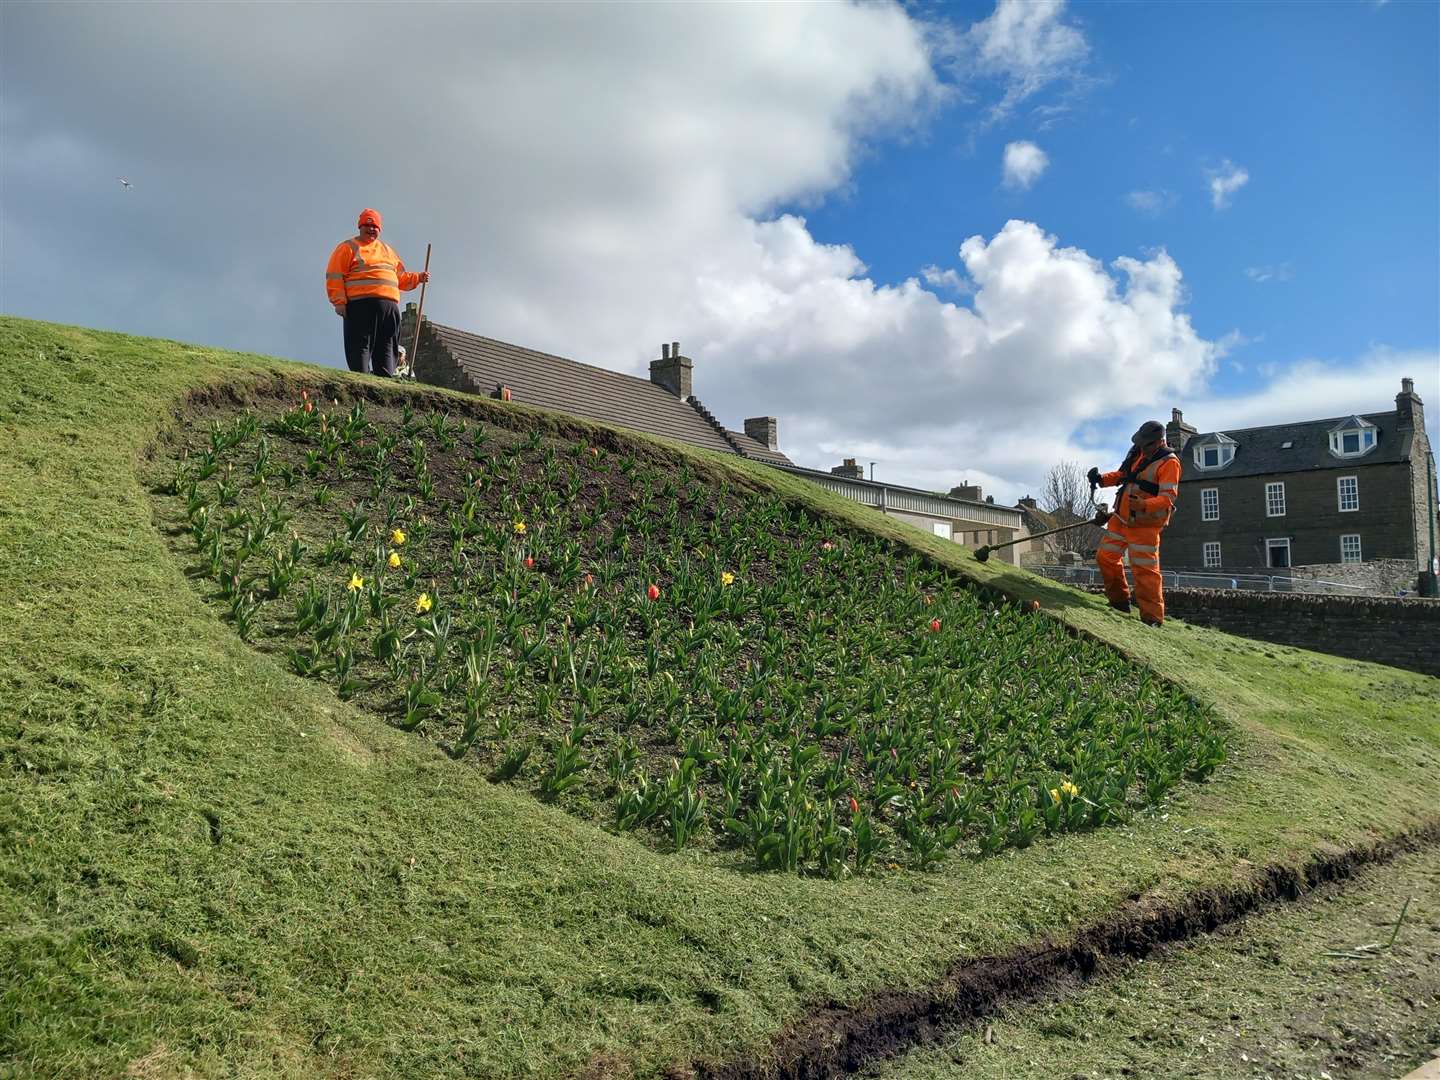 Derek Bremner took this photograph of the 'Toon Gardeners' cutting Kirkhill in Wick.